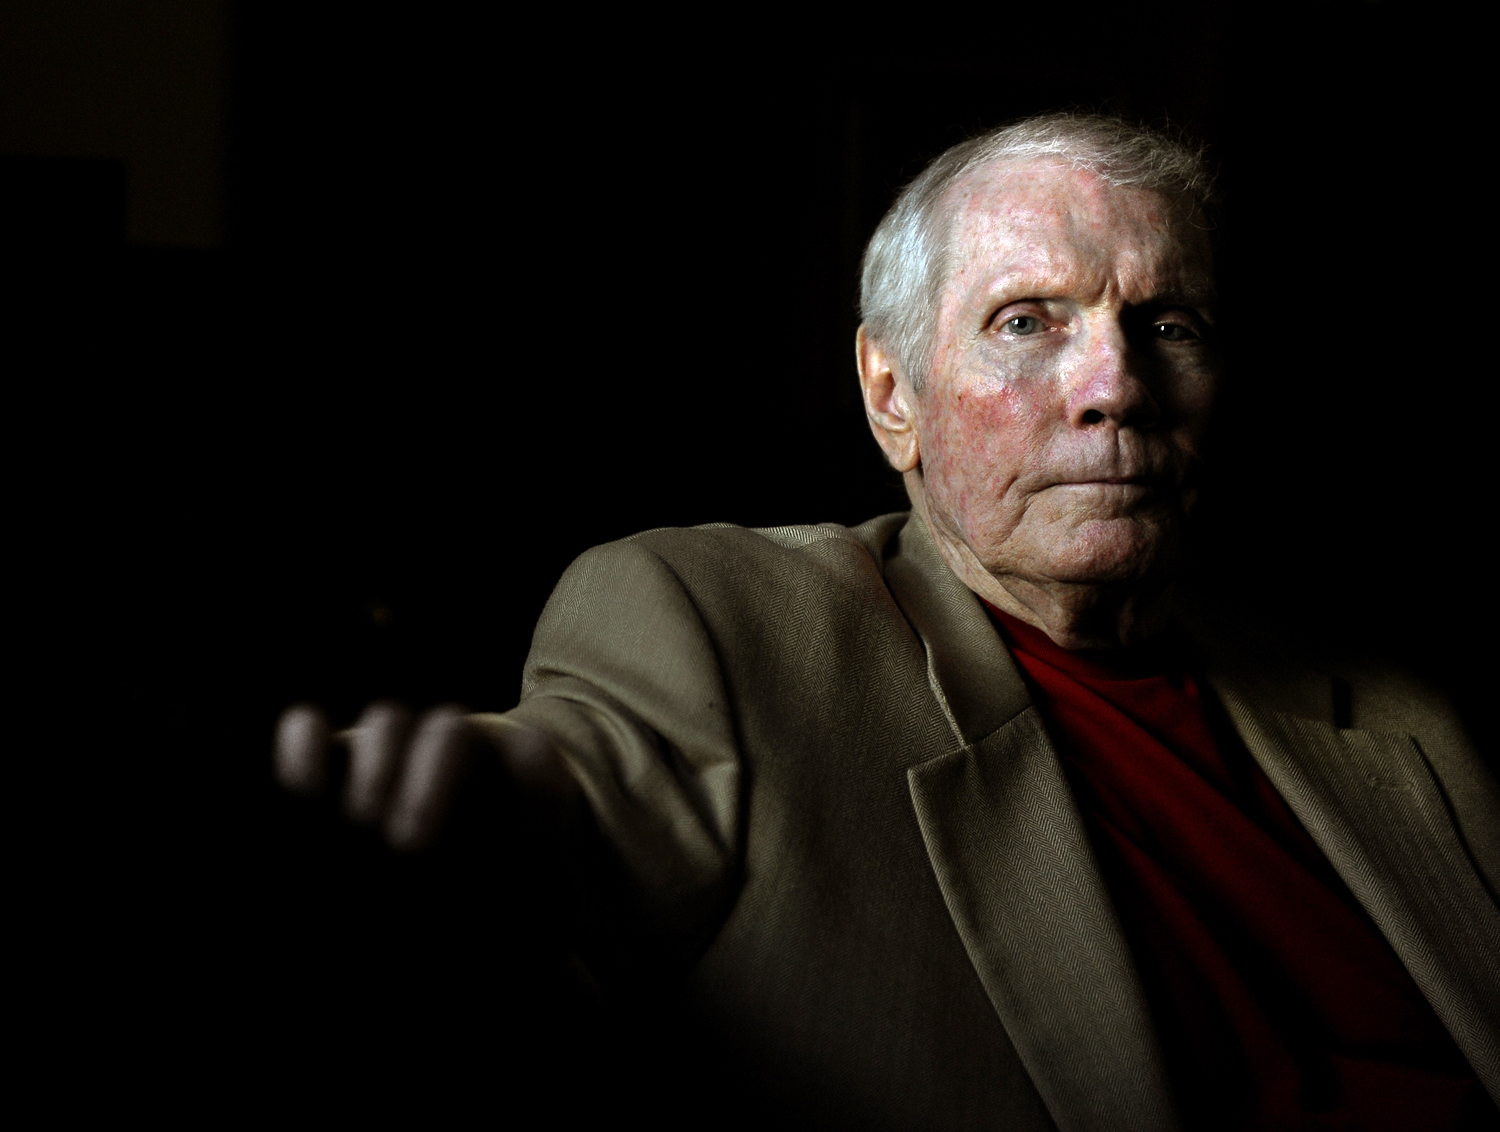 The Rev. Fred Phelps leads the controversial Westboro Baptist Church. (Michael S. Williamson—Washington Post)